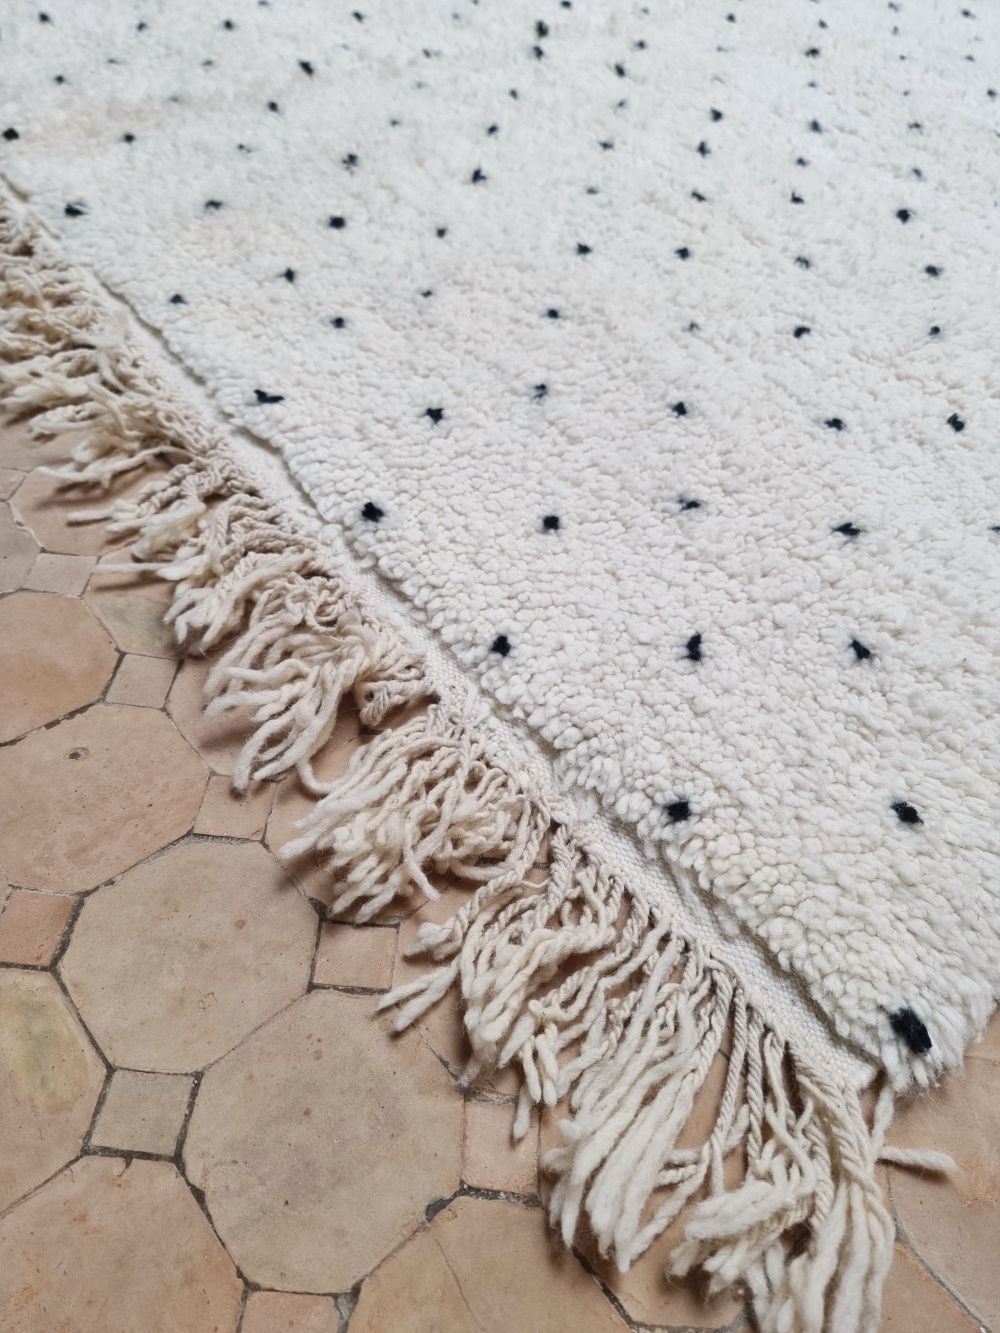 Moroccan Dotted Rug 300x200cm